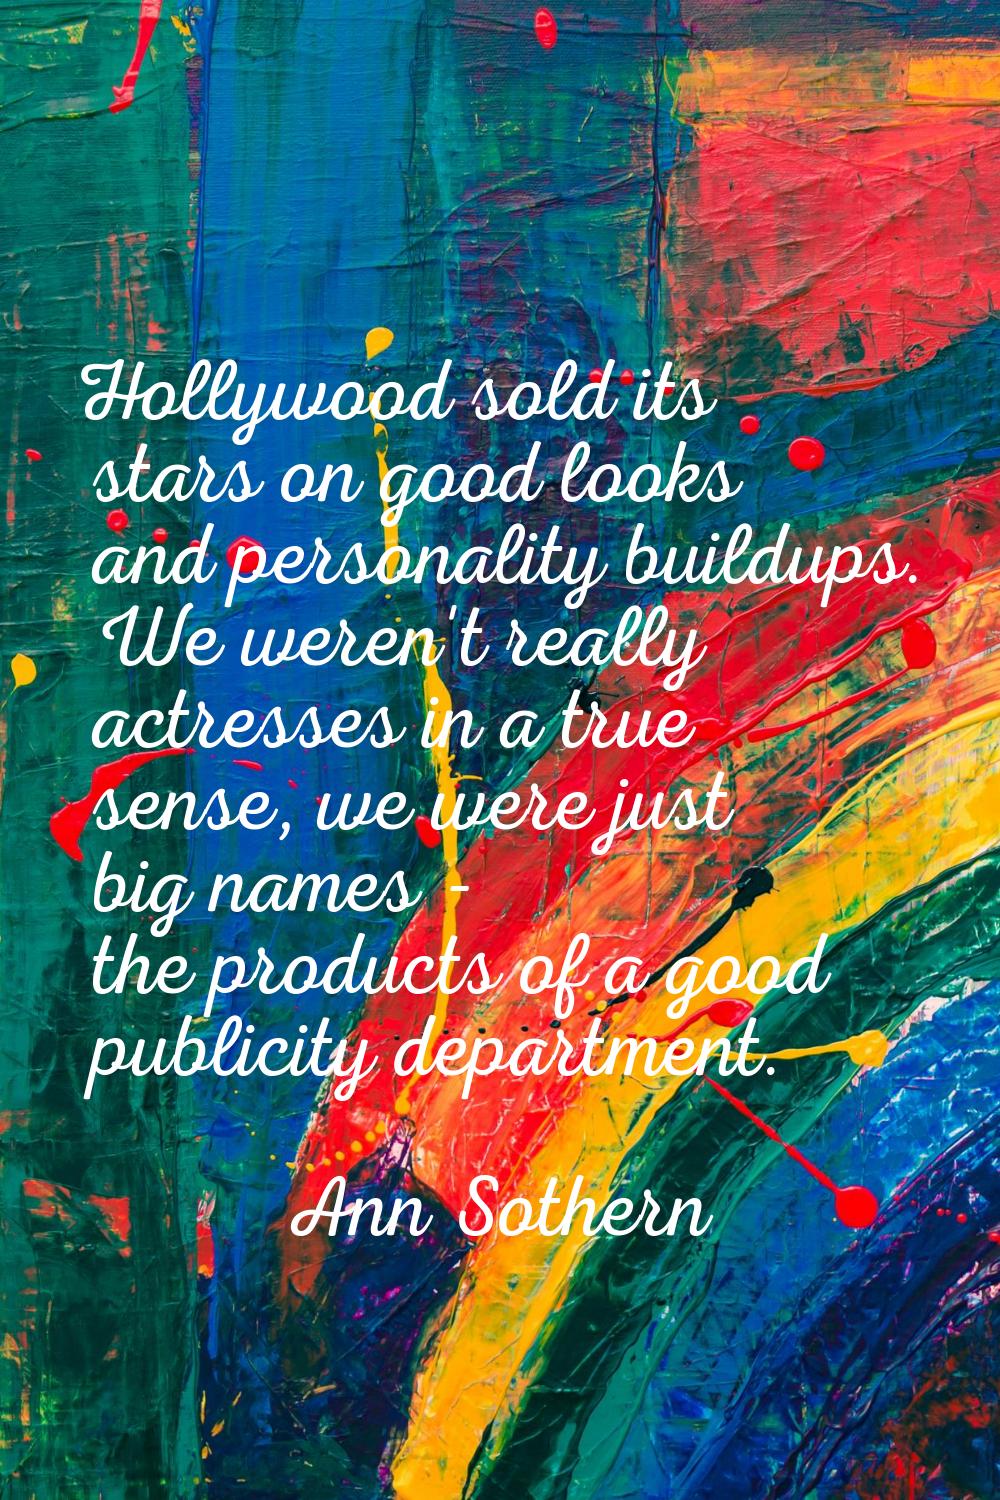 Hollywood sold its stars on good looks and personality buildups. We weren't really actresses in a t